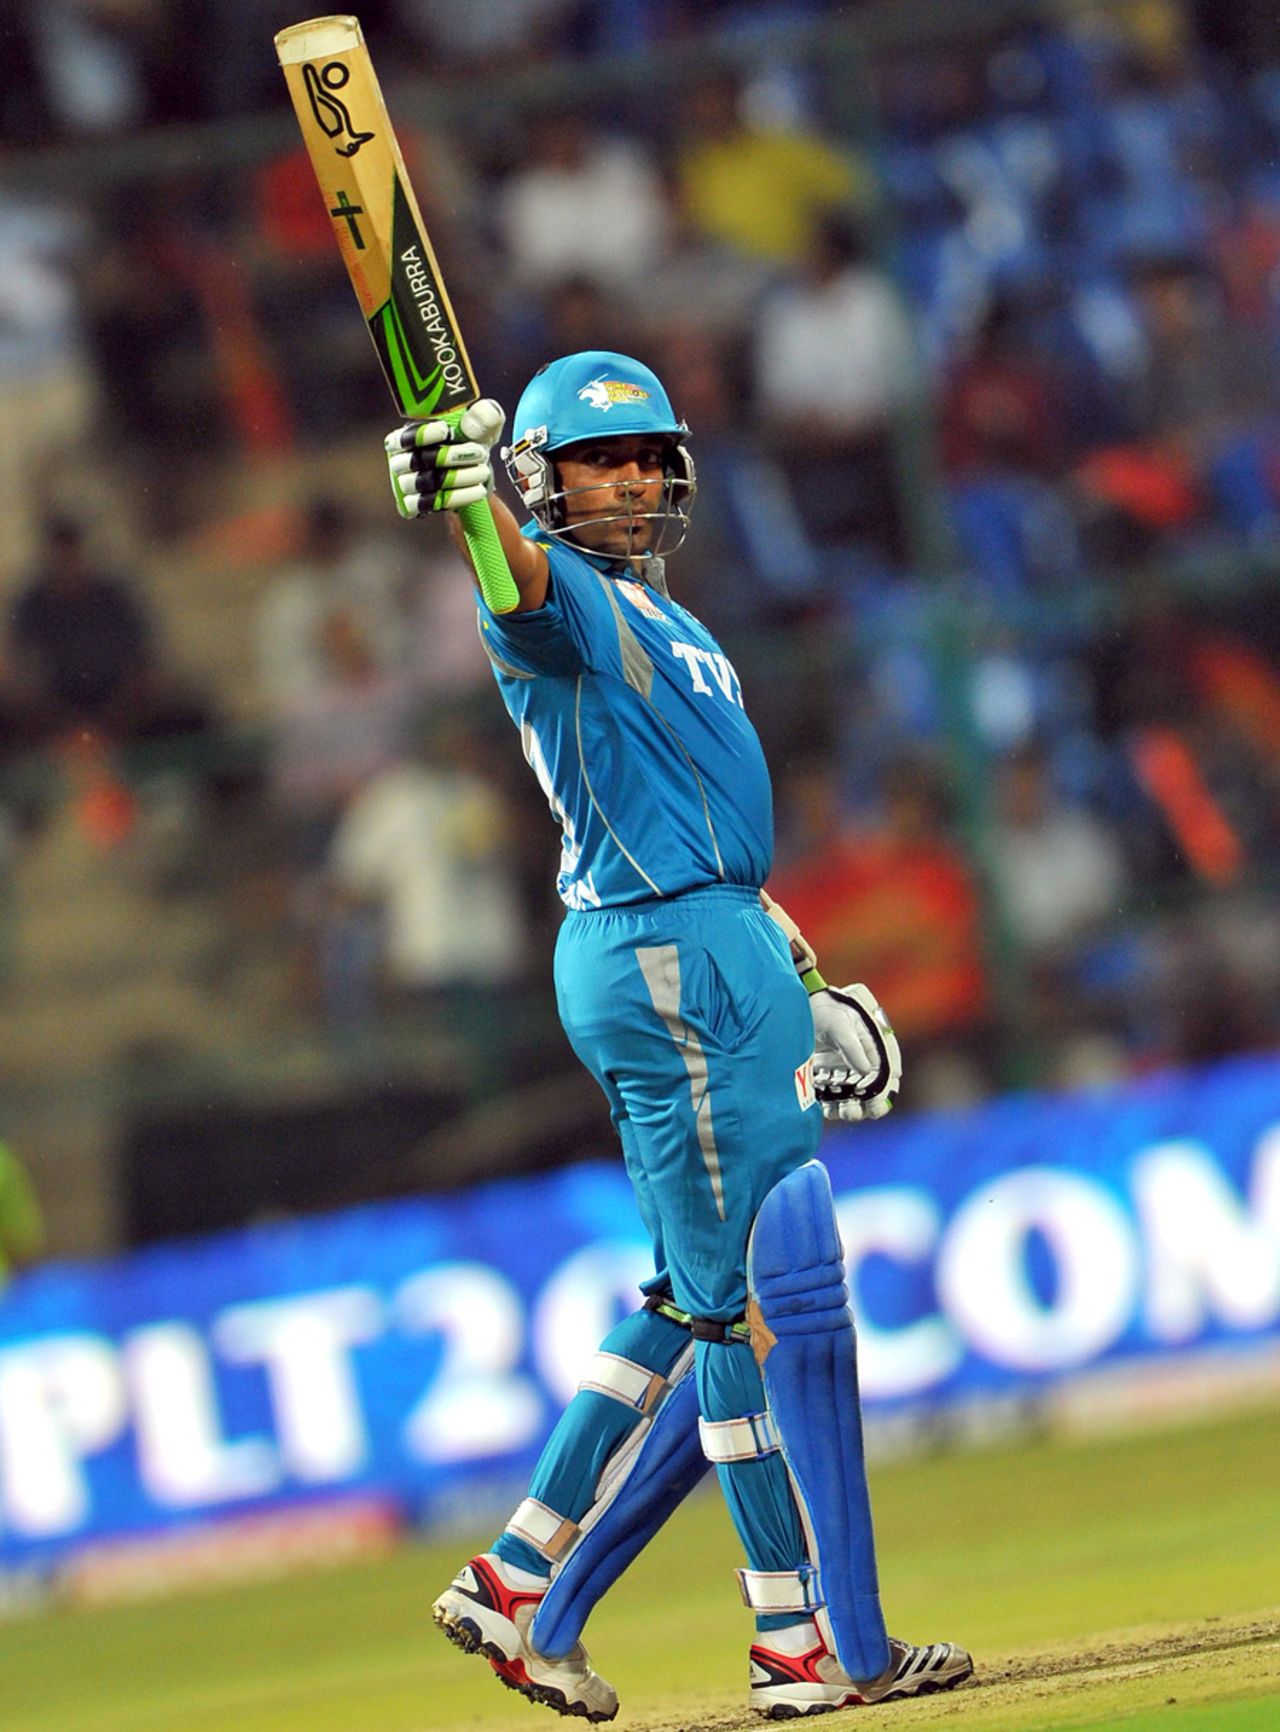 Robin Uthappa acknowledges the applause for his fifty, Royal Challengers Bangalore v Pune Warriors, IPL, Bangalore, April 17, 2012